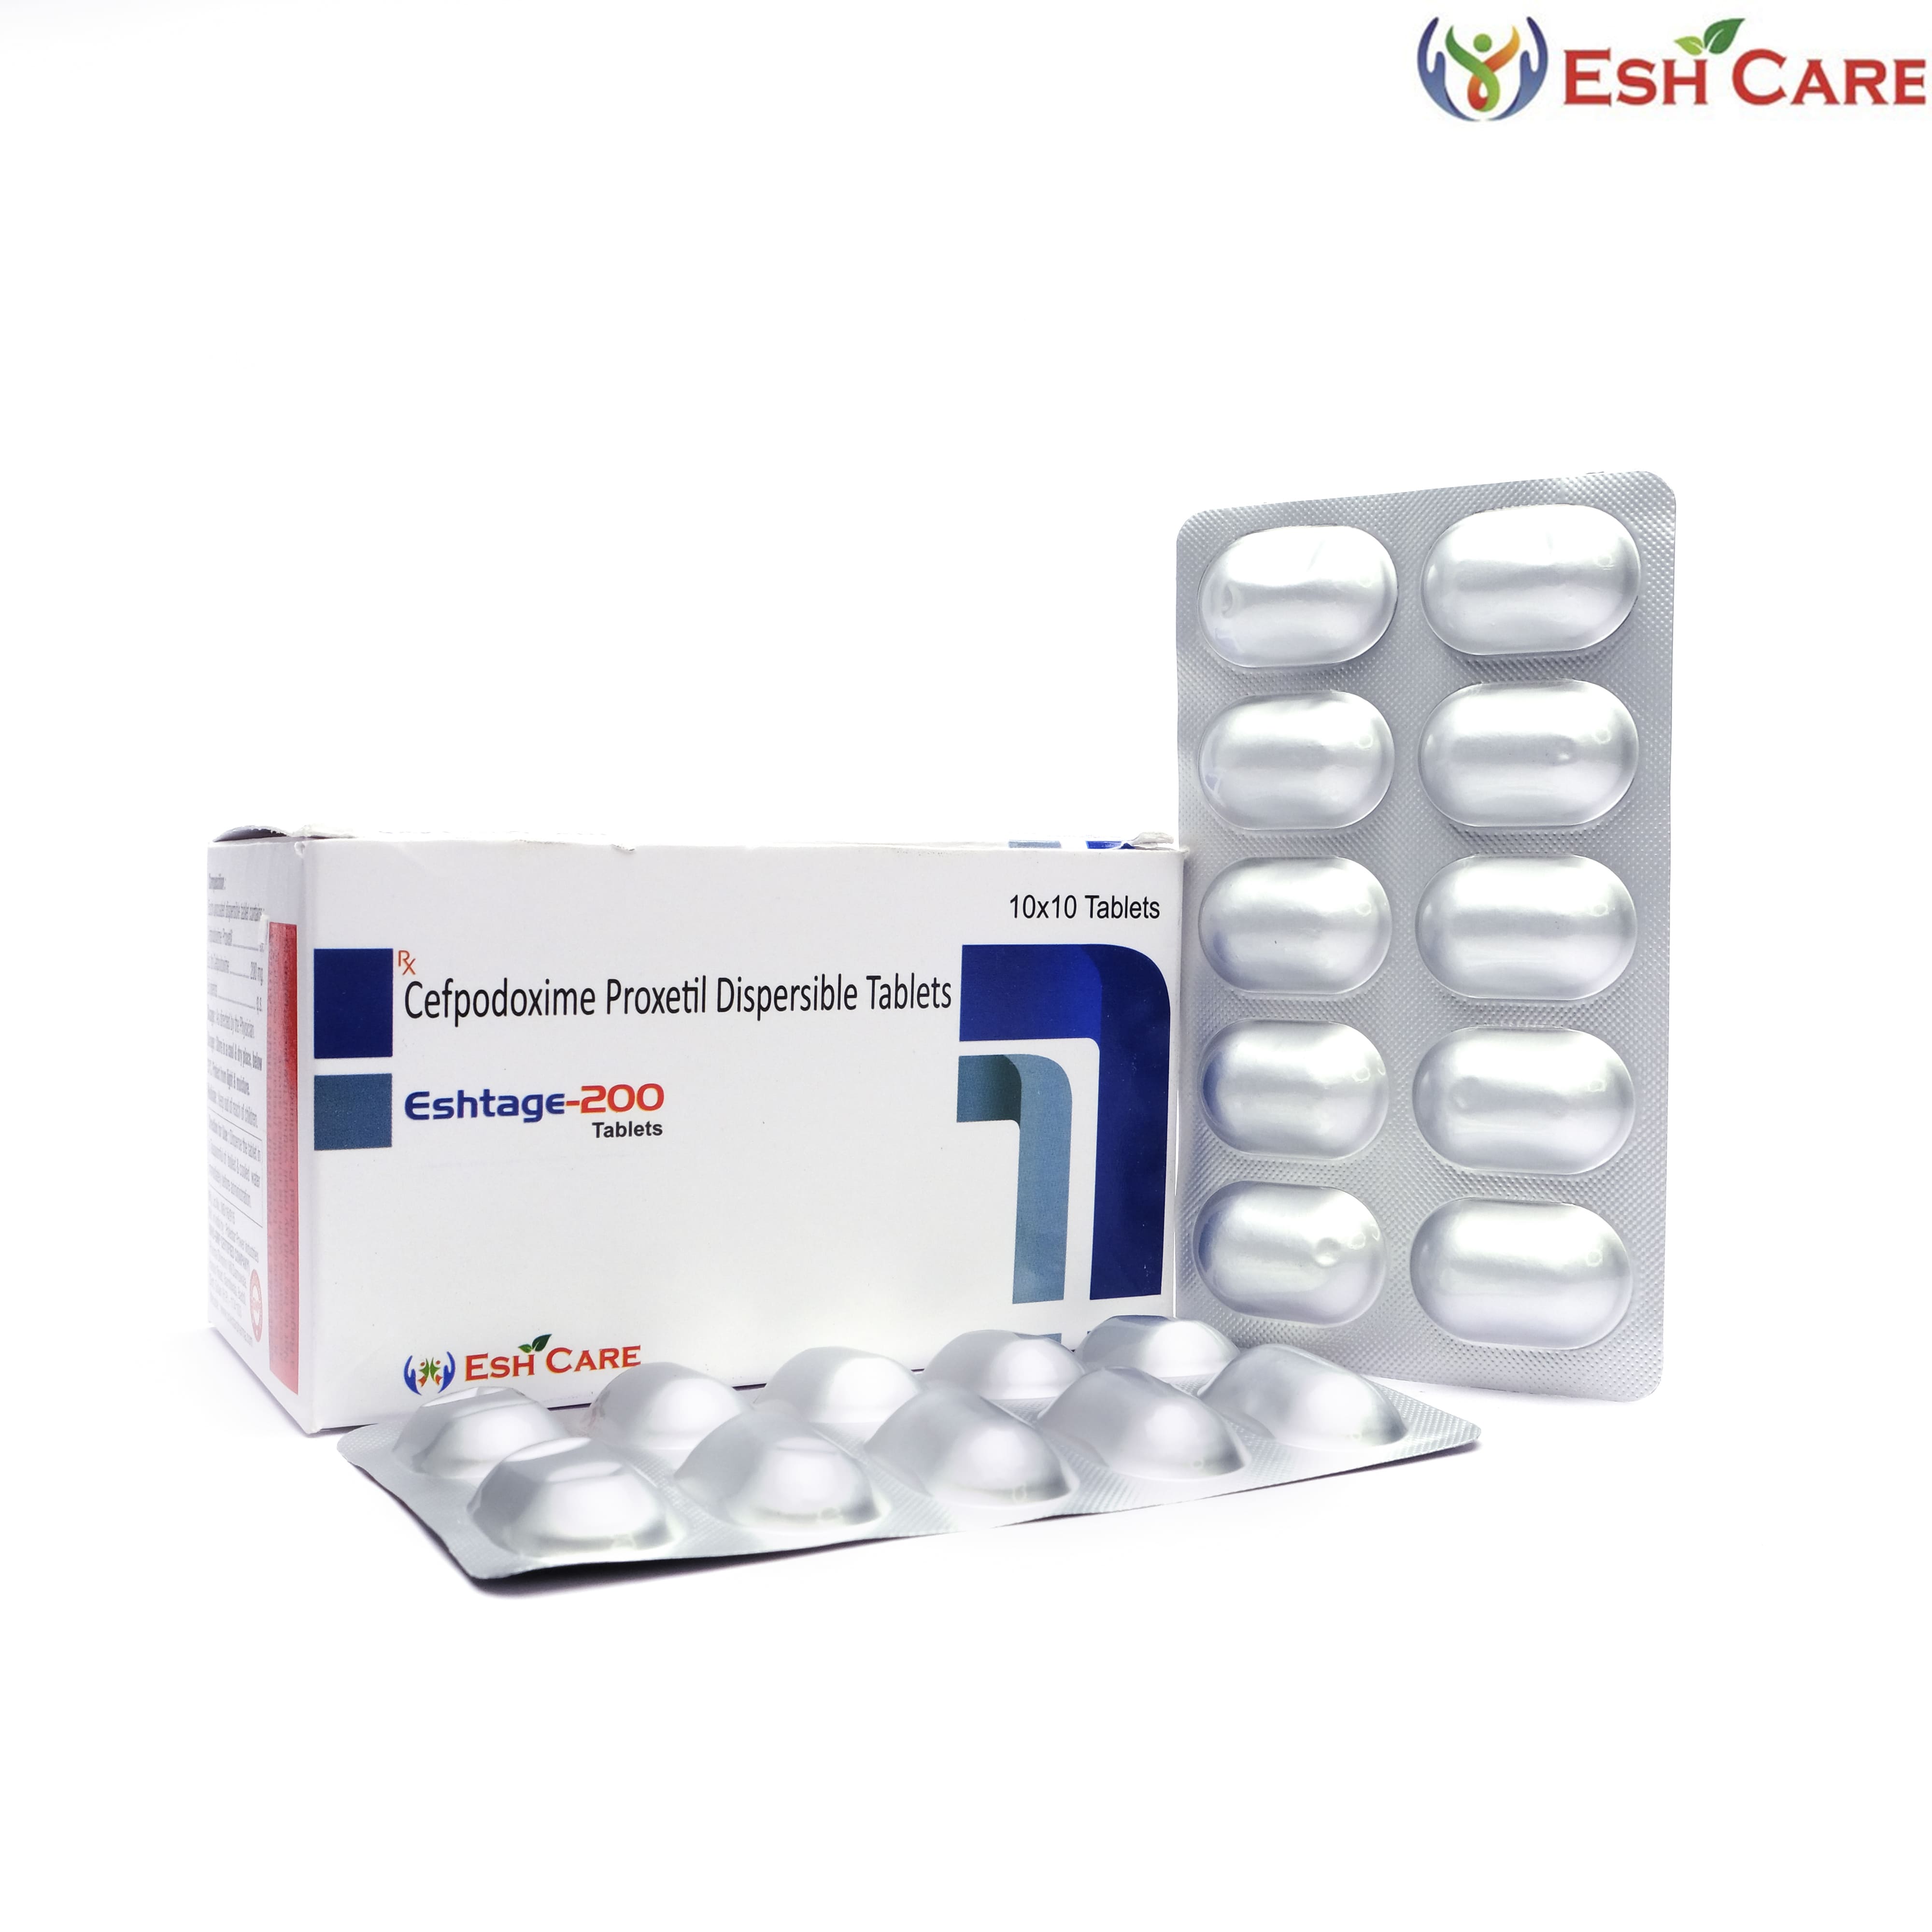 Cefpodoxime Proxetil Dispersible Tablets